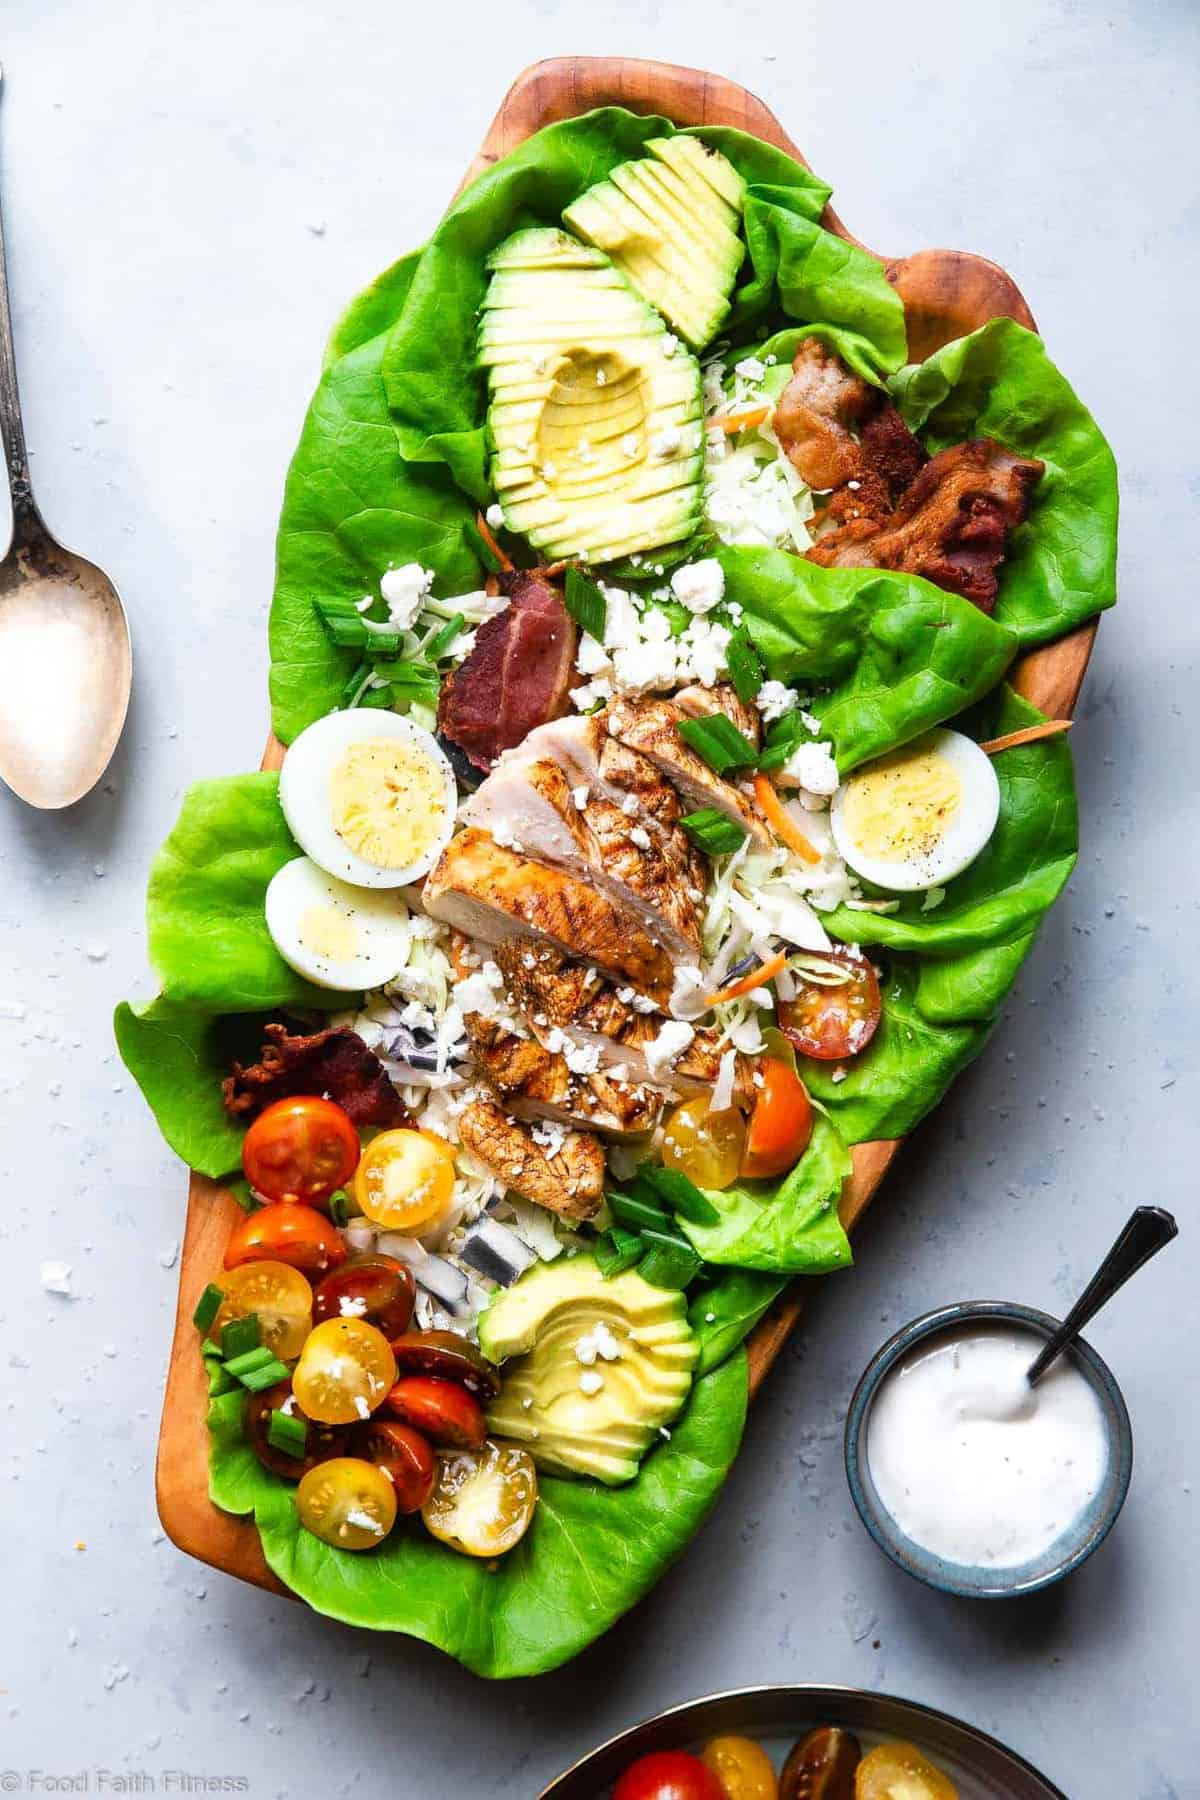 Healthy Chicken Cobb Salad Recipe -Â This quick, easy skinny Chicken Cobb Salad Recipe is a lighter remake that cuts over half the calories of the classic but not the taste! No one will know it's lighter, gluten free and lower carb! | #Foodfaithfitness | #Glutenfree #lowcarb #healthy #salad #grainfree